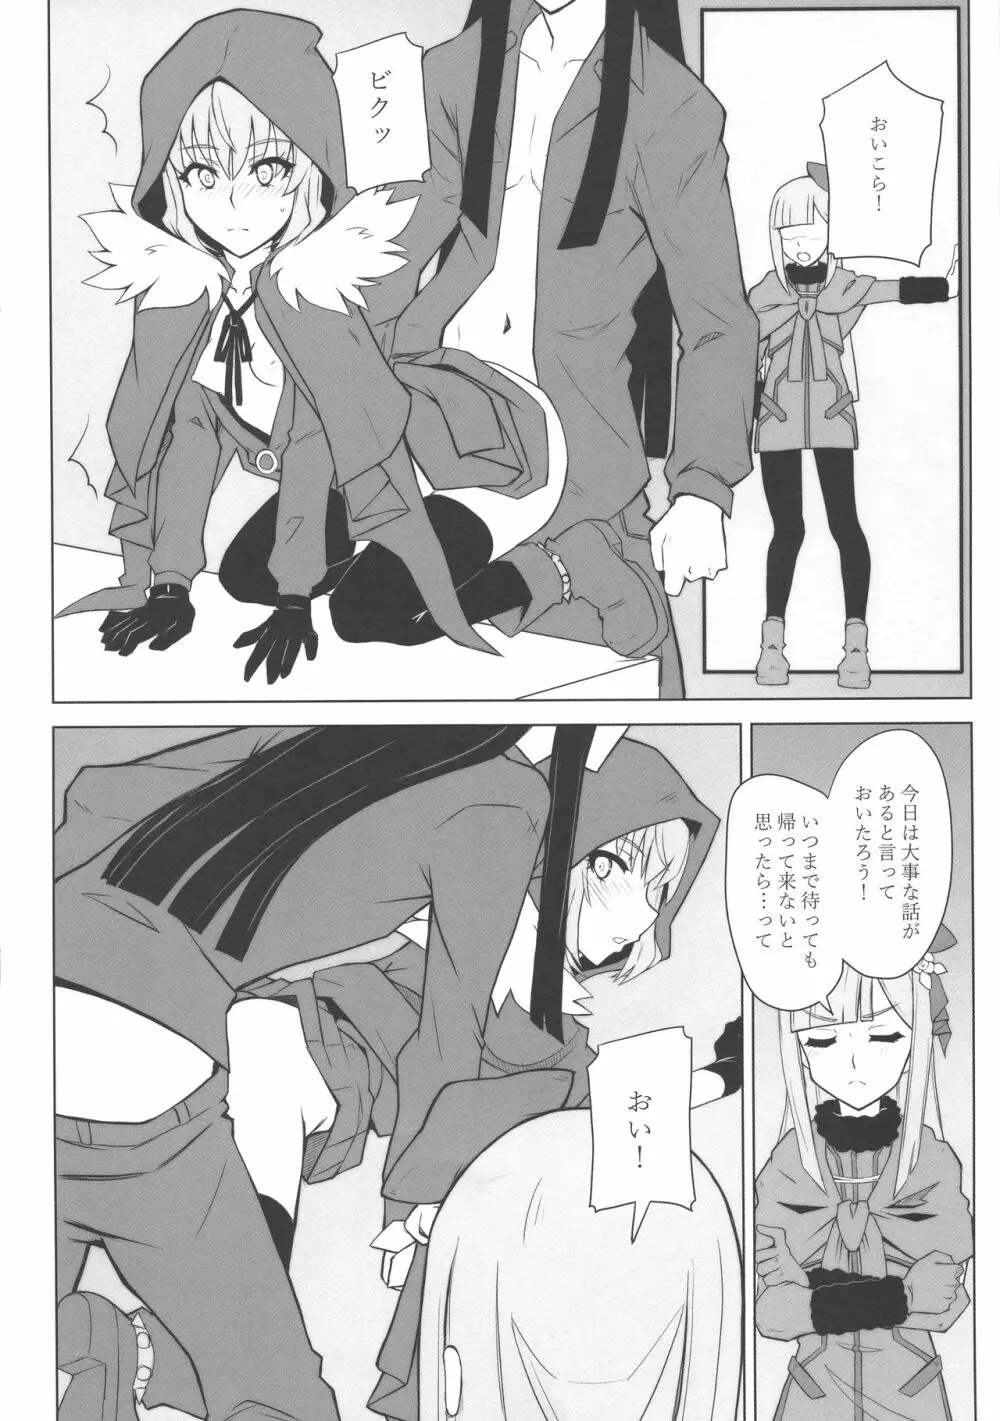 LADY REINES TIMES VOL.3 - page7